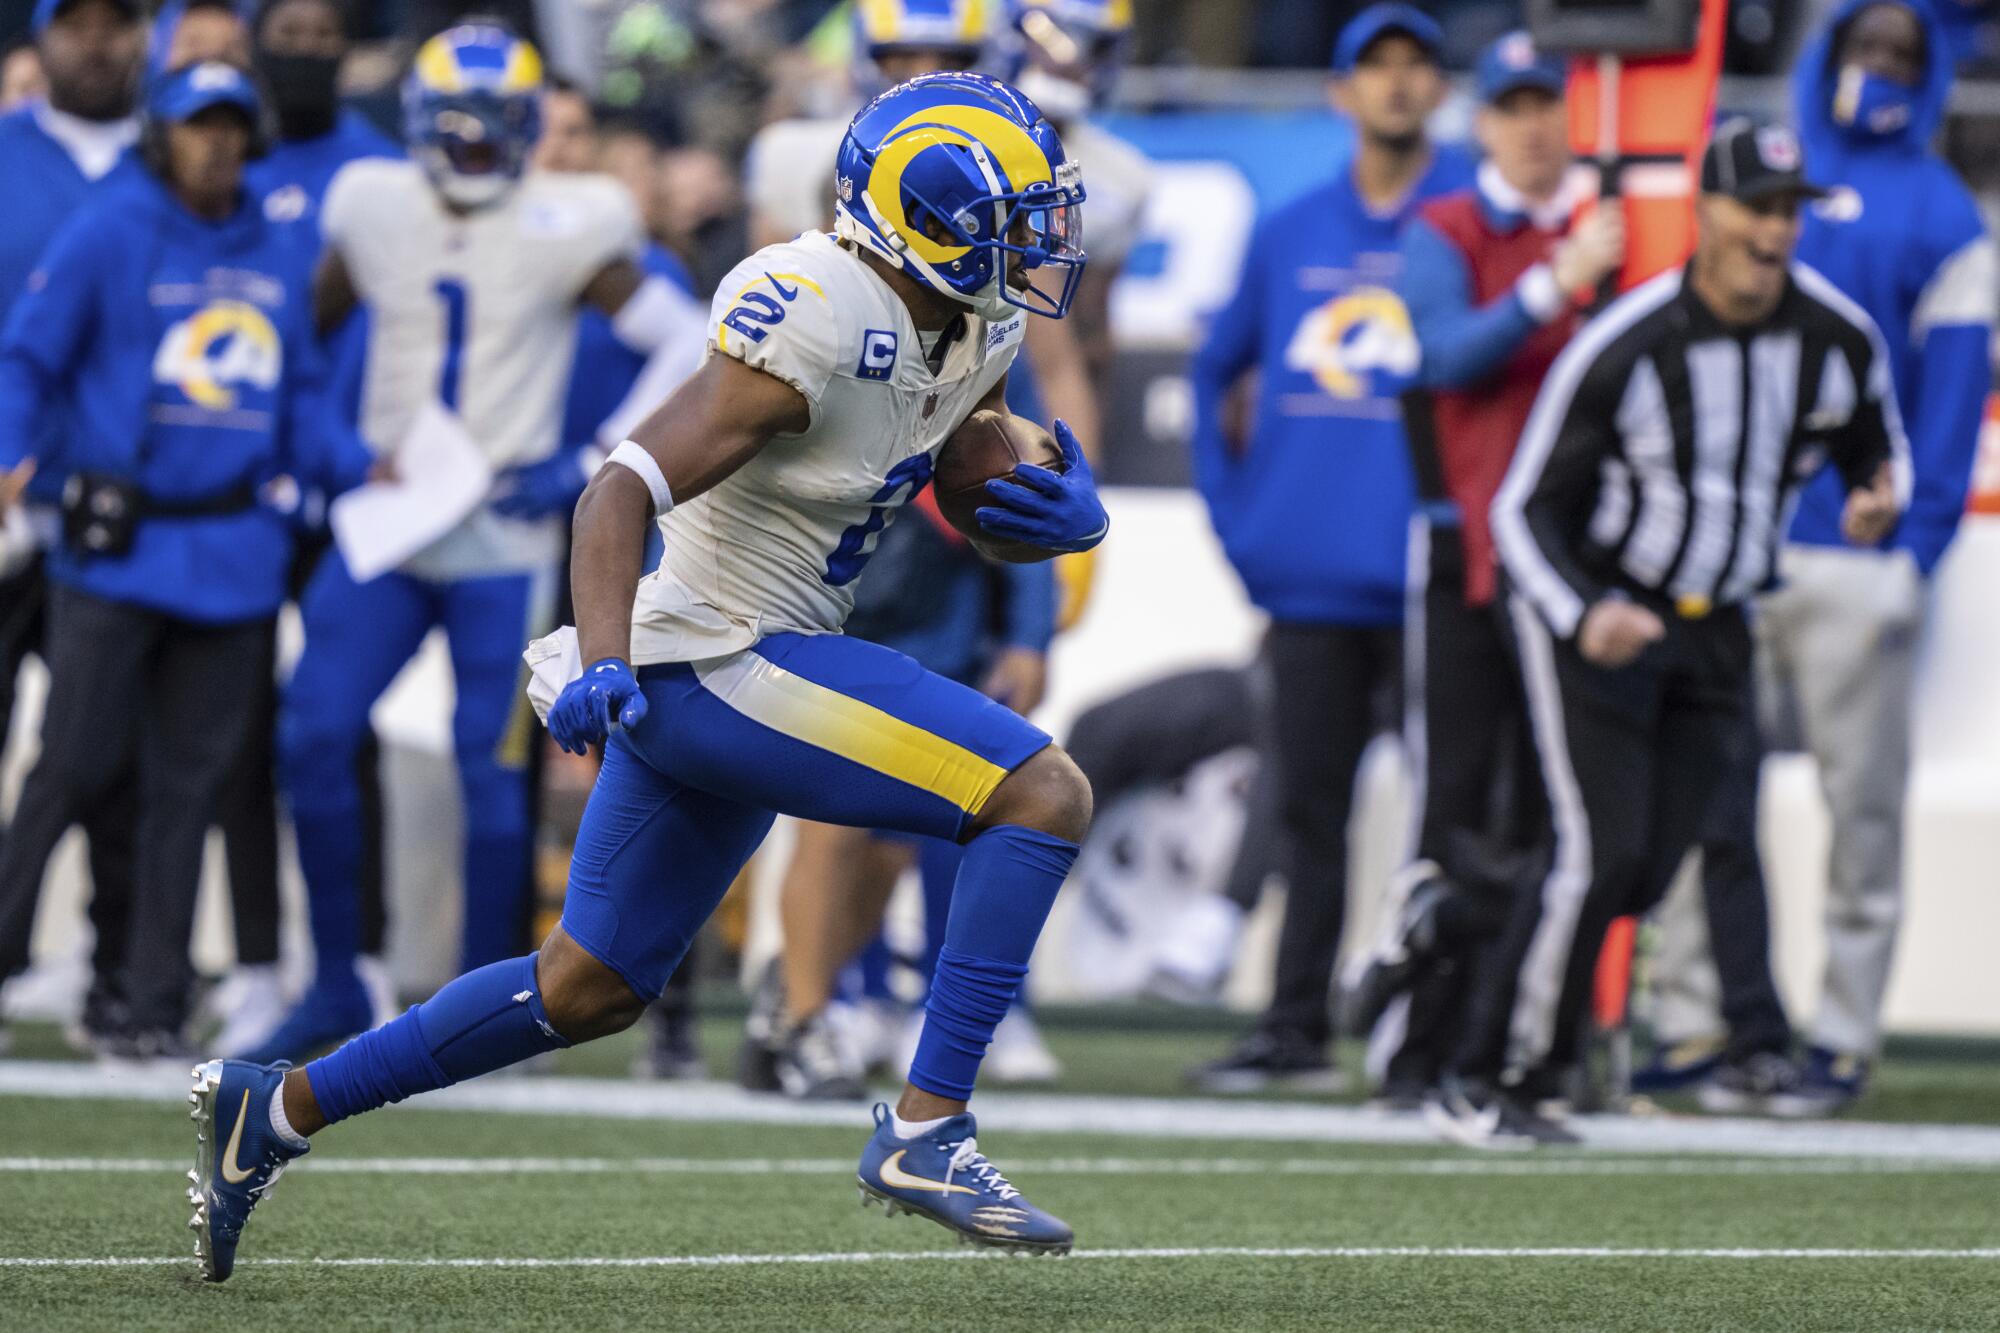 Rams wide receiver Robert Woods runs with the ball.